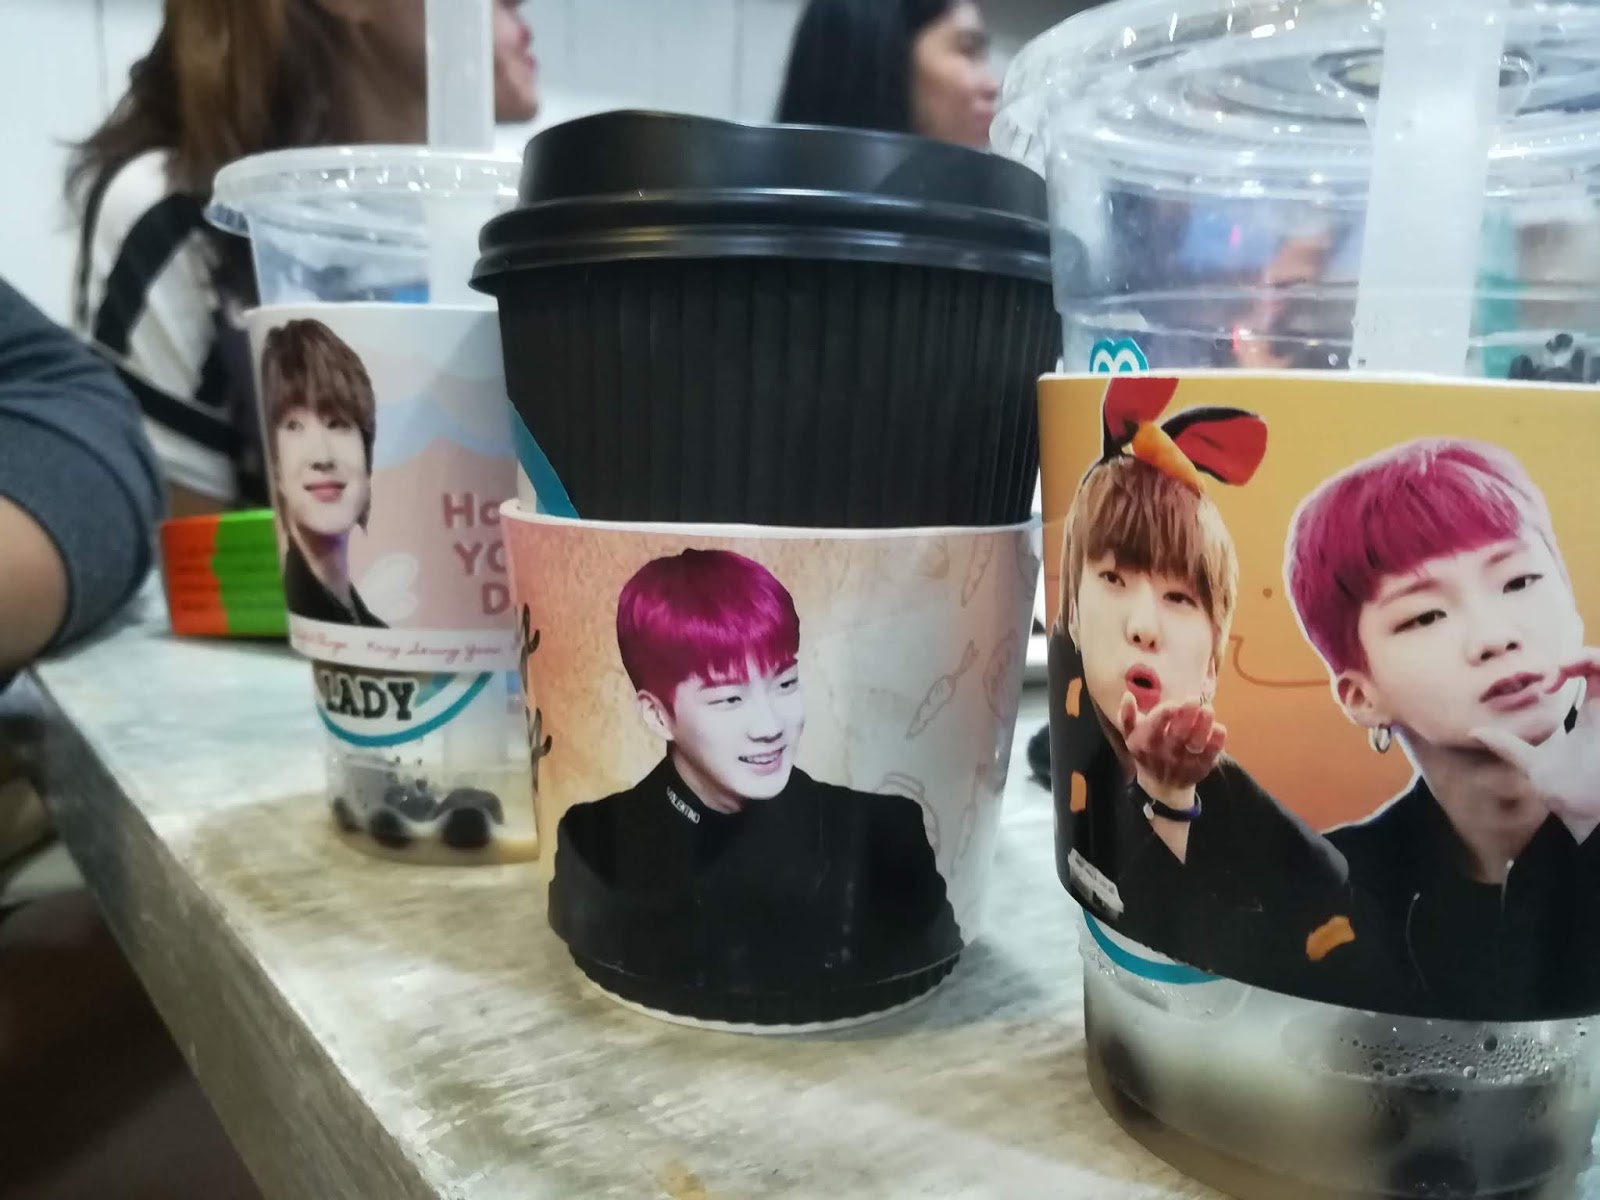 My First Cup Sleeve Event Experience - Happy 2Seung Day!